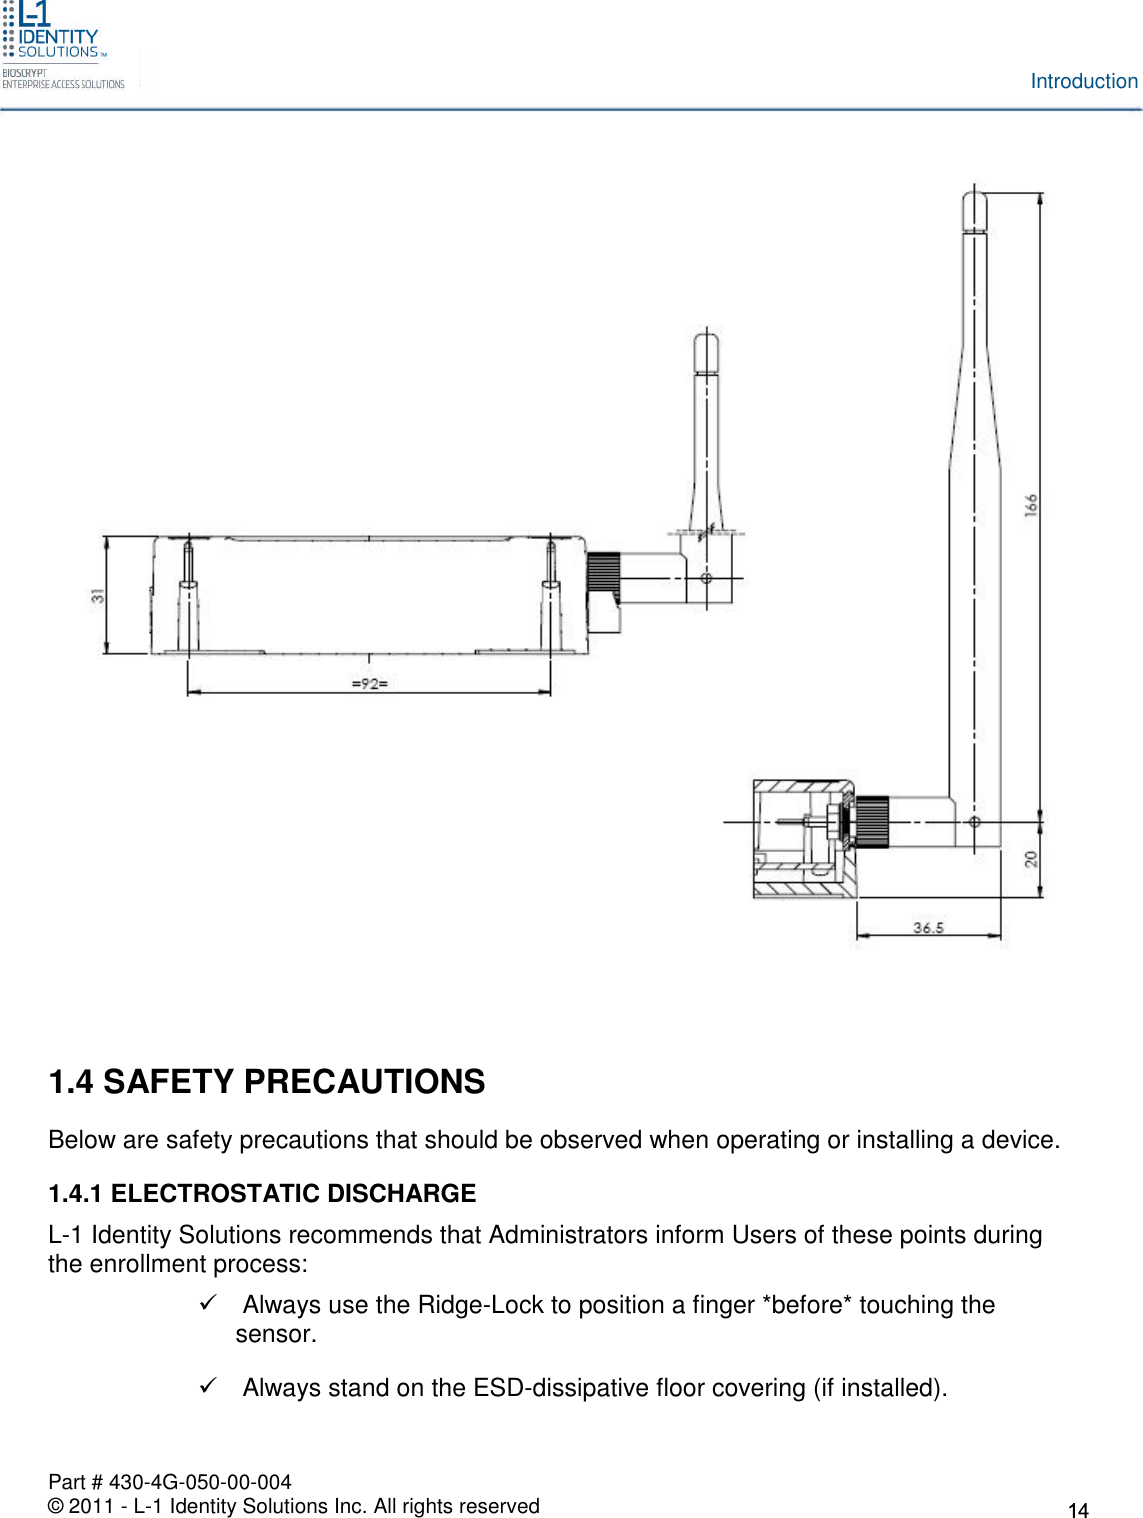 Part # 430-4G-050-00-004© 2011 - L-1 Identity Solutions Inc. All rights reservedIntroduction1.4 SAFETY PRECAUTIONSBelow are safety precautions that should be observed when operating or installing a device.1.4.1 ELECTROSTATIC DISCHARGEL-1 Identity Solutions recommends that Administrators inform Users of these points duringthe enrollment process:Always use the Ridge-Lock to position a finger *before* touching thesensor.Always stand on the ESD-dissipative floor covering (if installed).